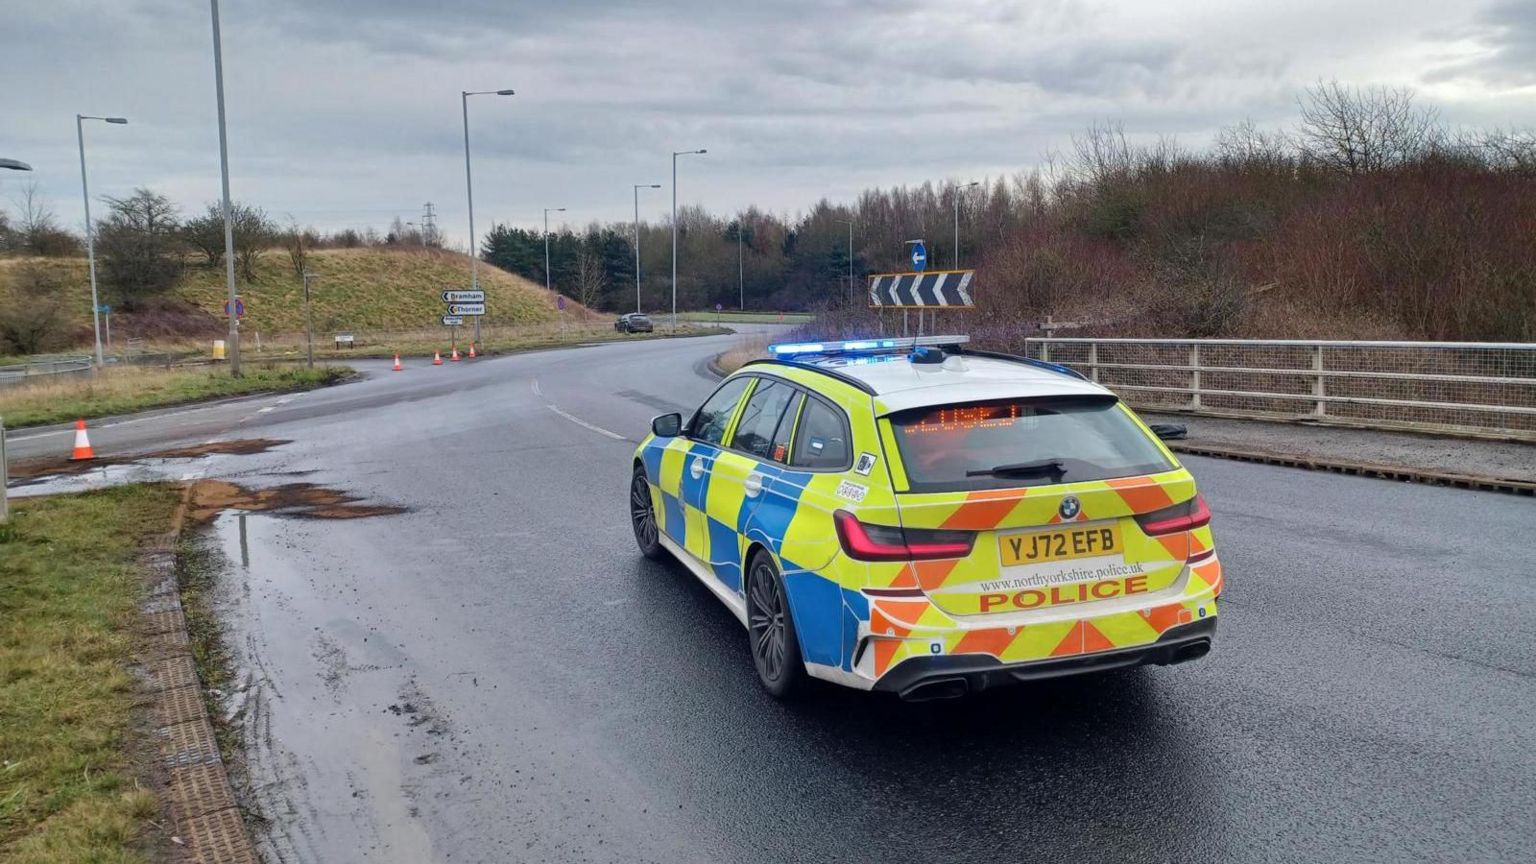 Police at the scene of an oil spillage at the junction of the A1(M) and A64